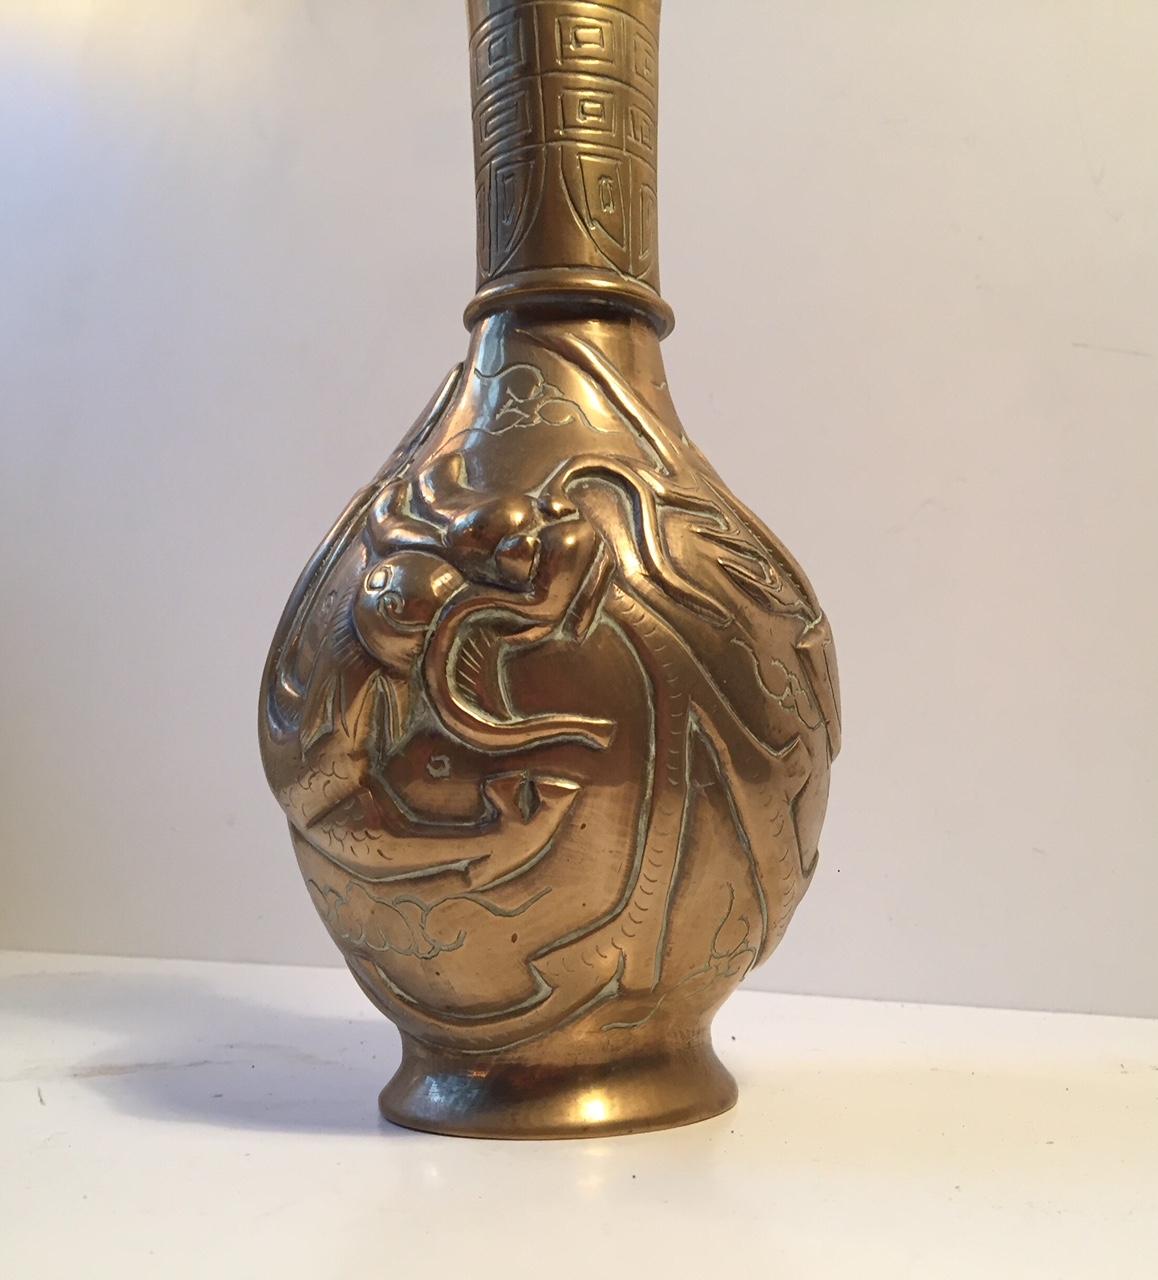 A vintage Chinese vase in Brass. The decorations are handmade. Its signed by an unidentified maker to the base. It was made for export purposes during the early-mid 20th century.